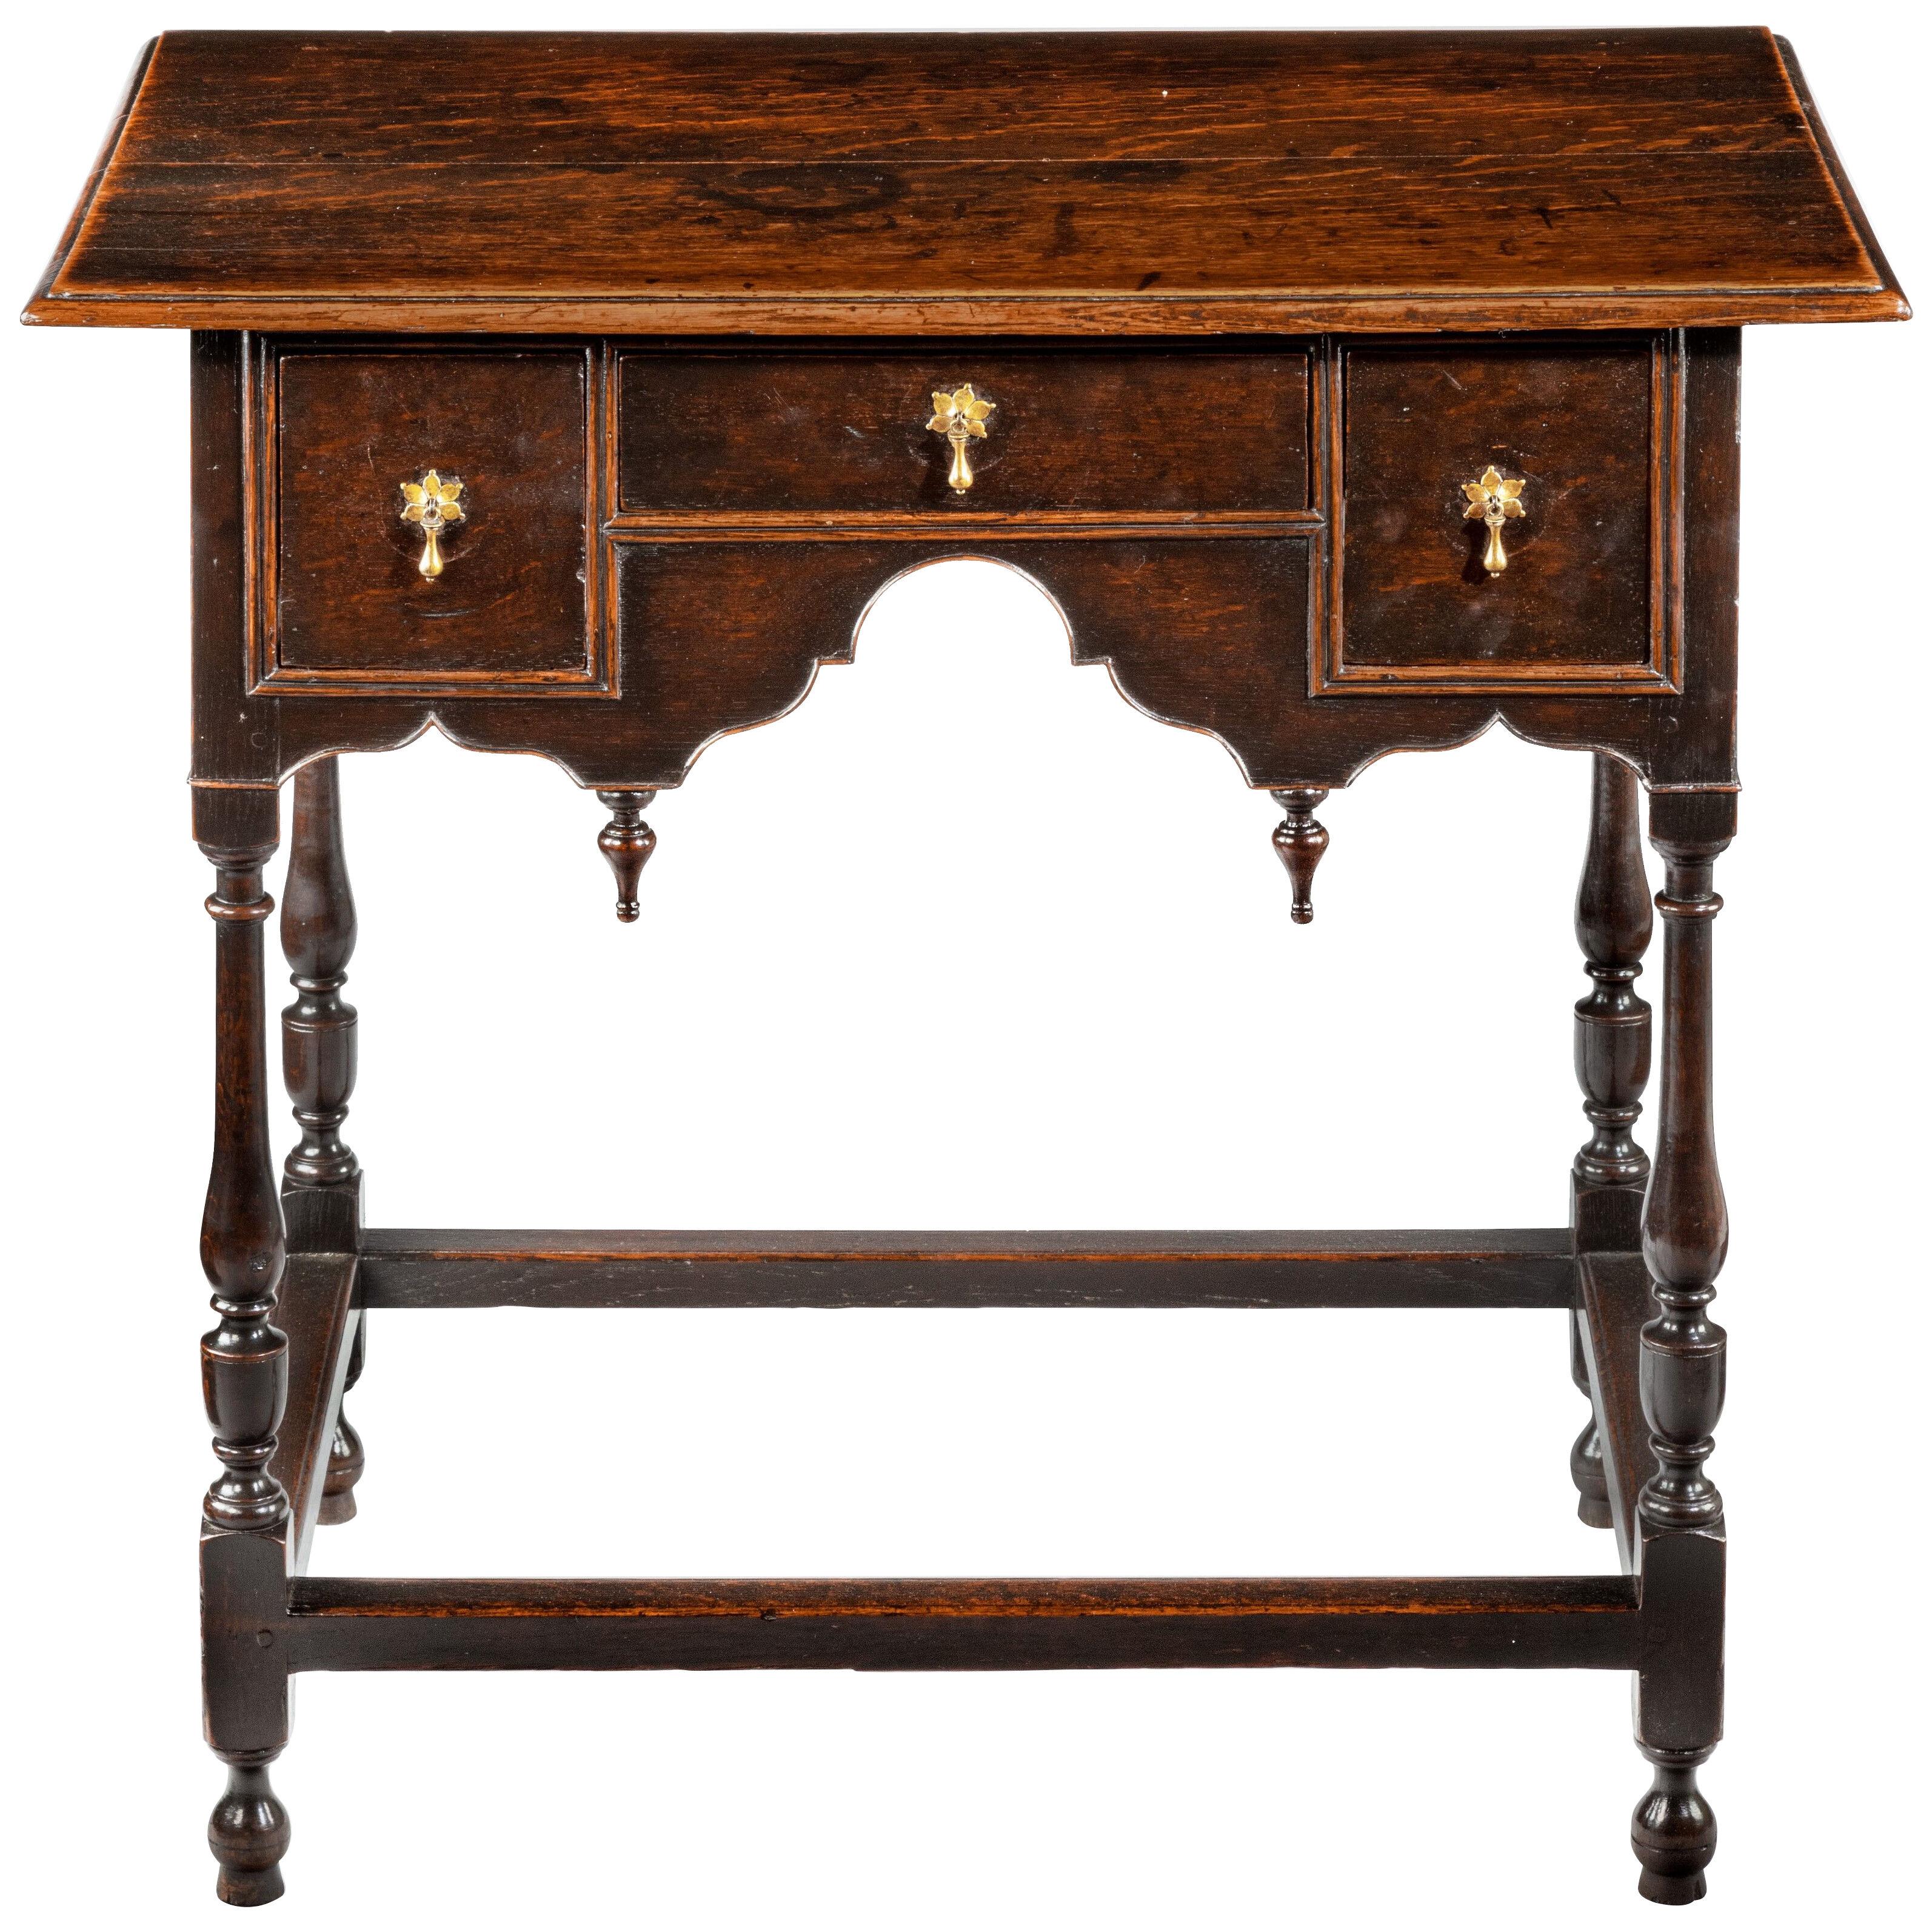  George I Joined Oak Side Table with Turned Legs and Finials